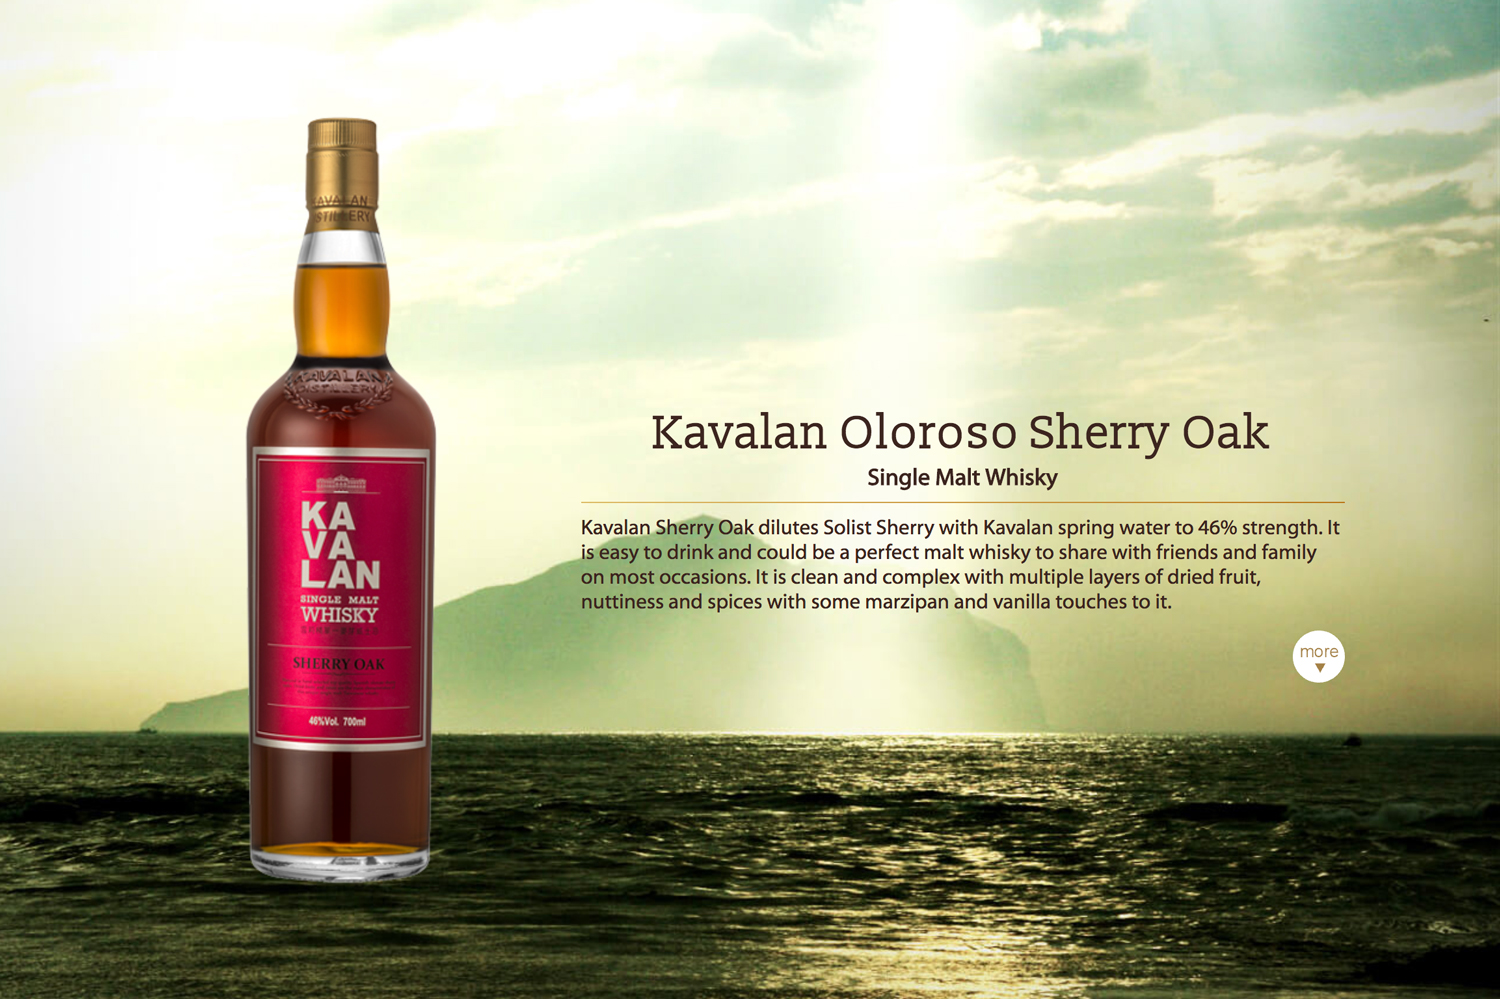 The Kavalan Oloroso Sherry Oak had received the highest grade possible -- Gold Outstanding.